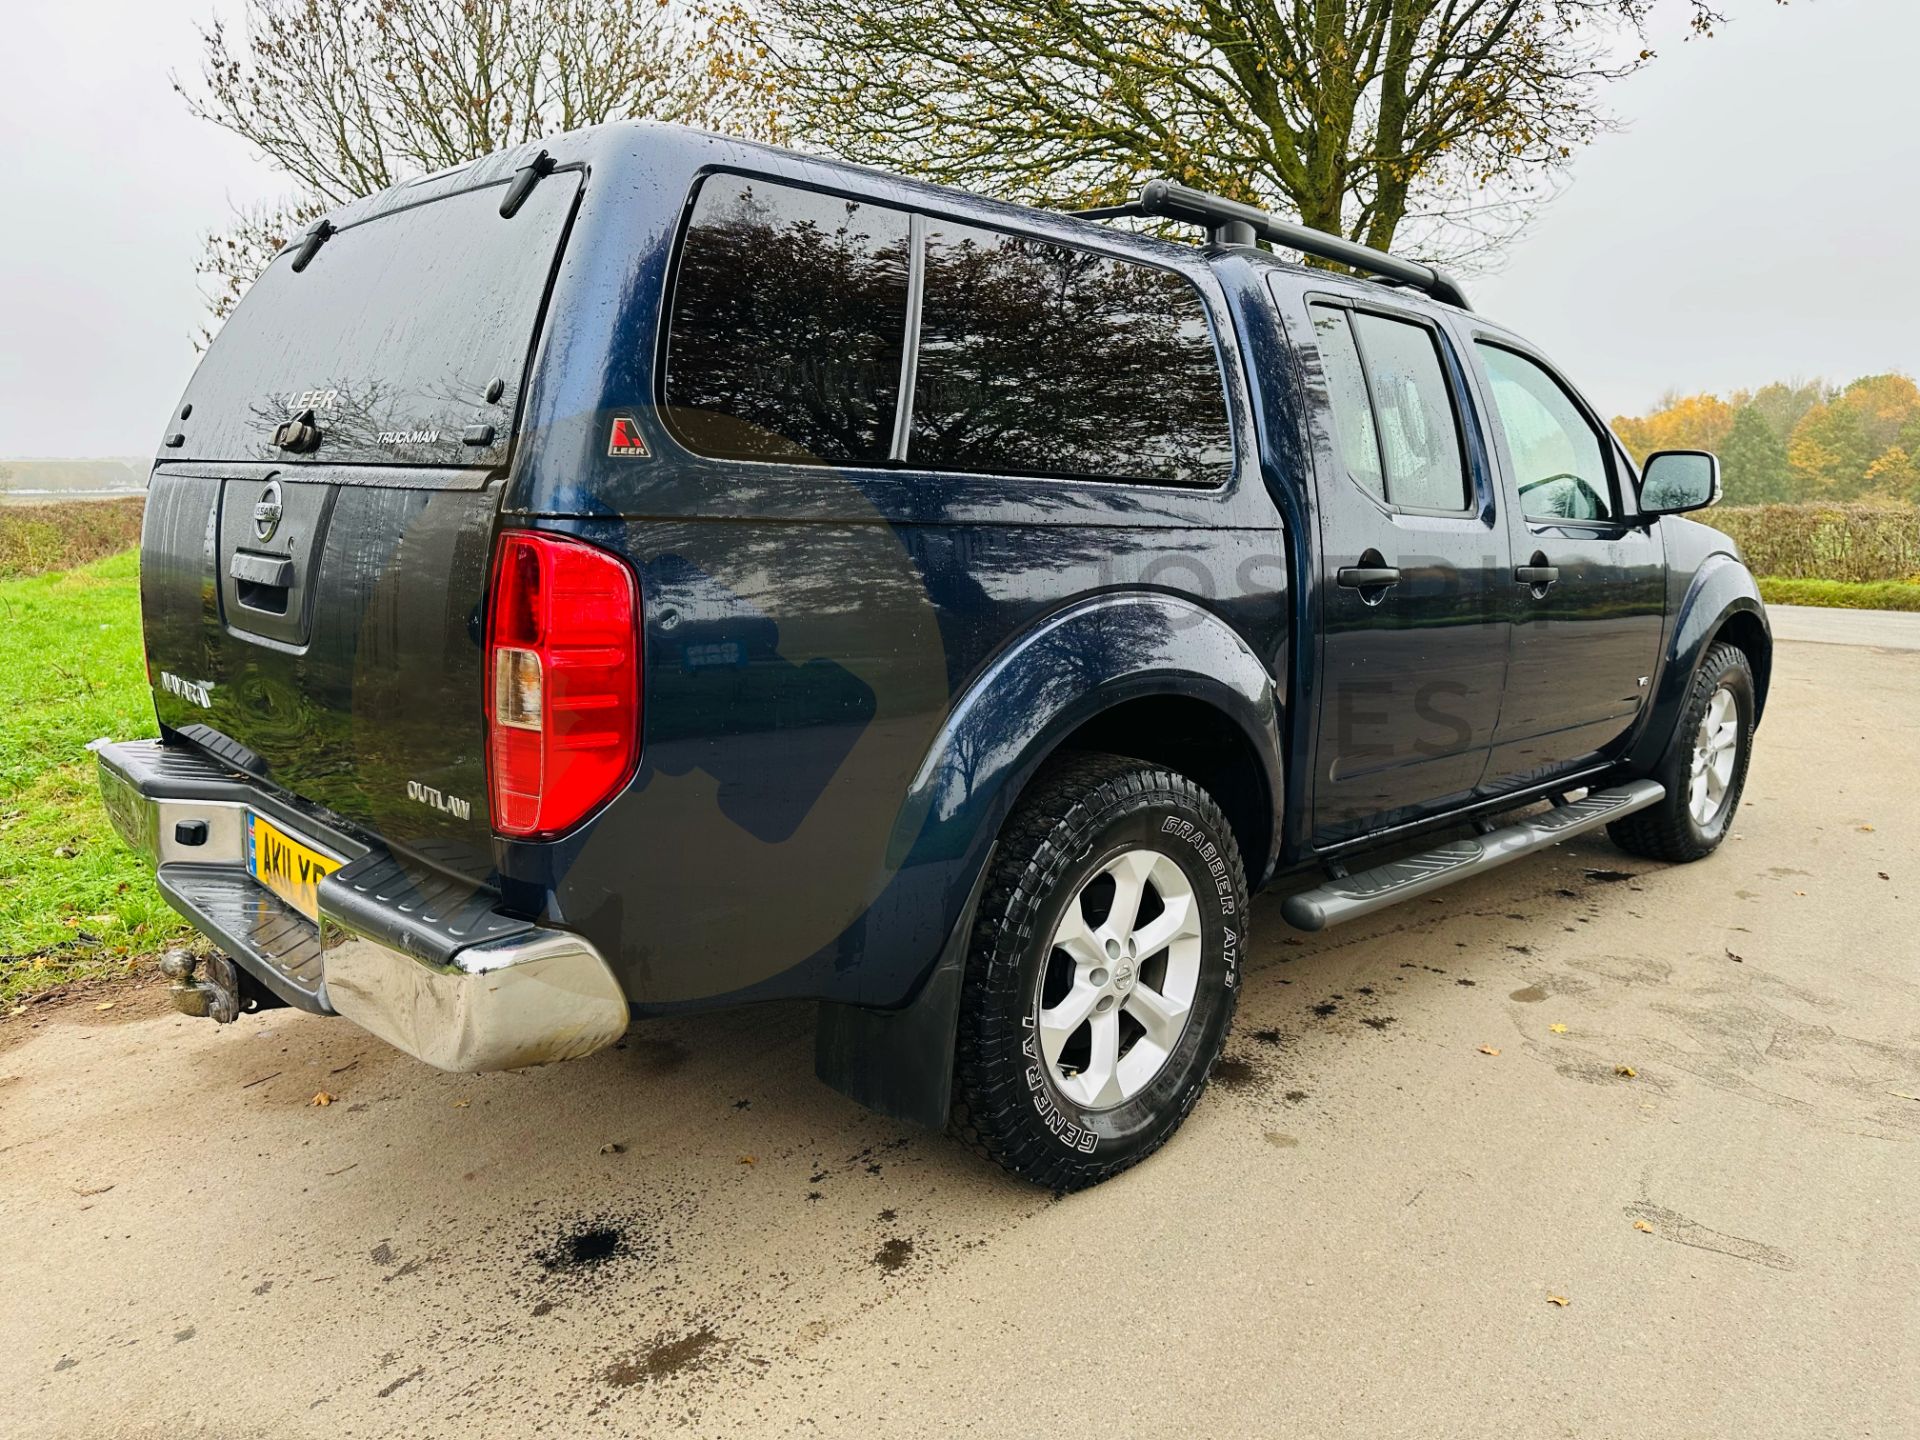 (ON SALE)NISSAN NAVARA *OUTLAW EDITION* 3.0 V6 TURBO DIESEL AUTOMATIC DOUBLE CAB PICKUP - 11 REG - Image 16 of 43